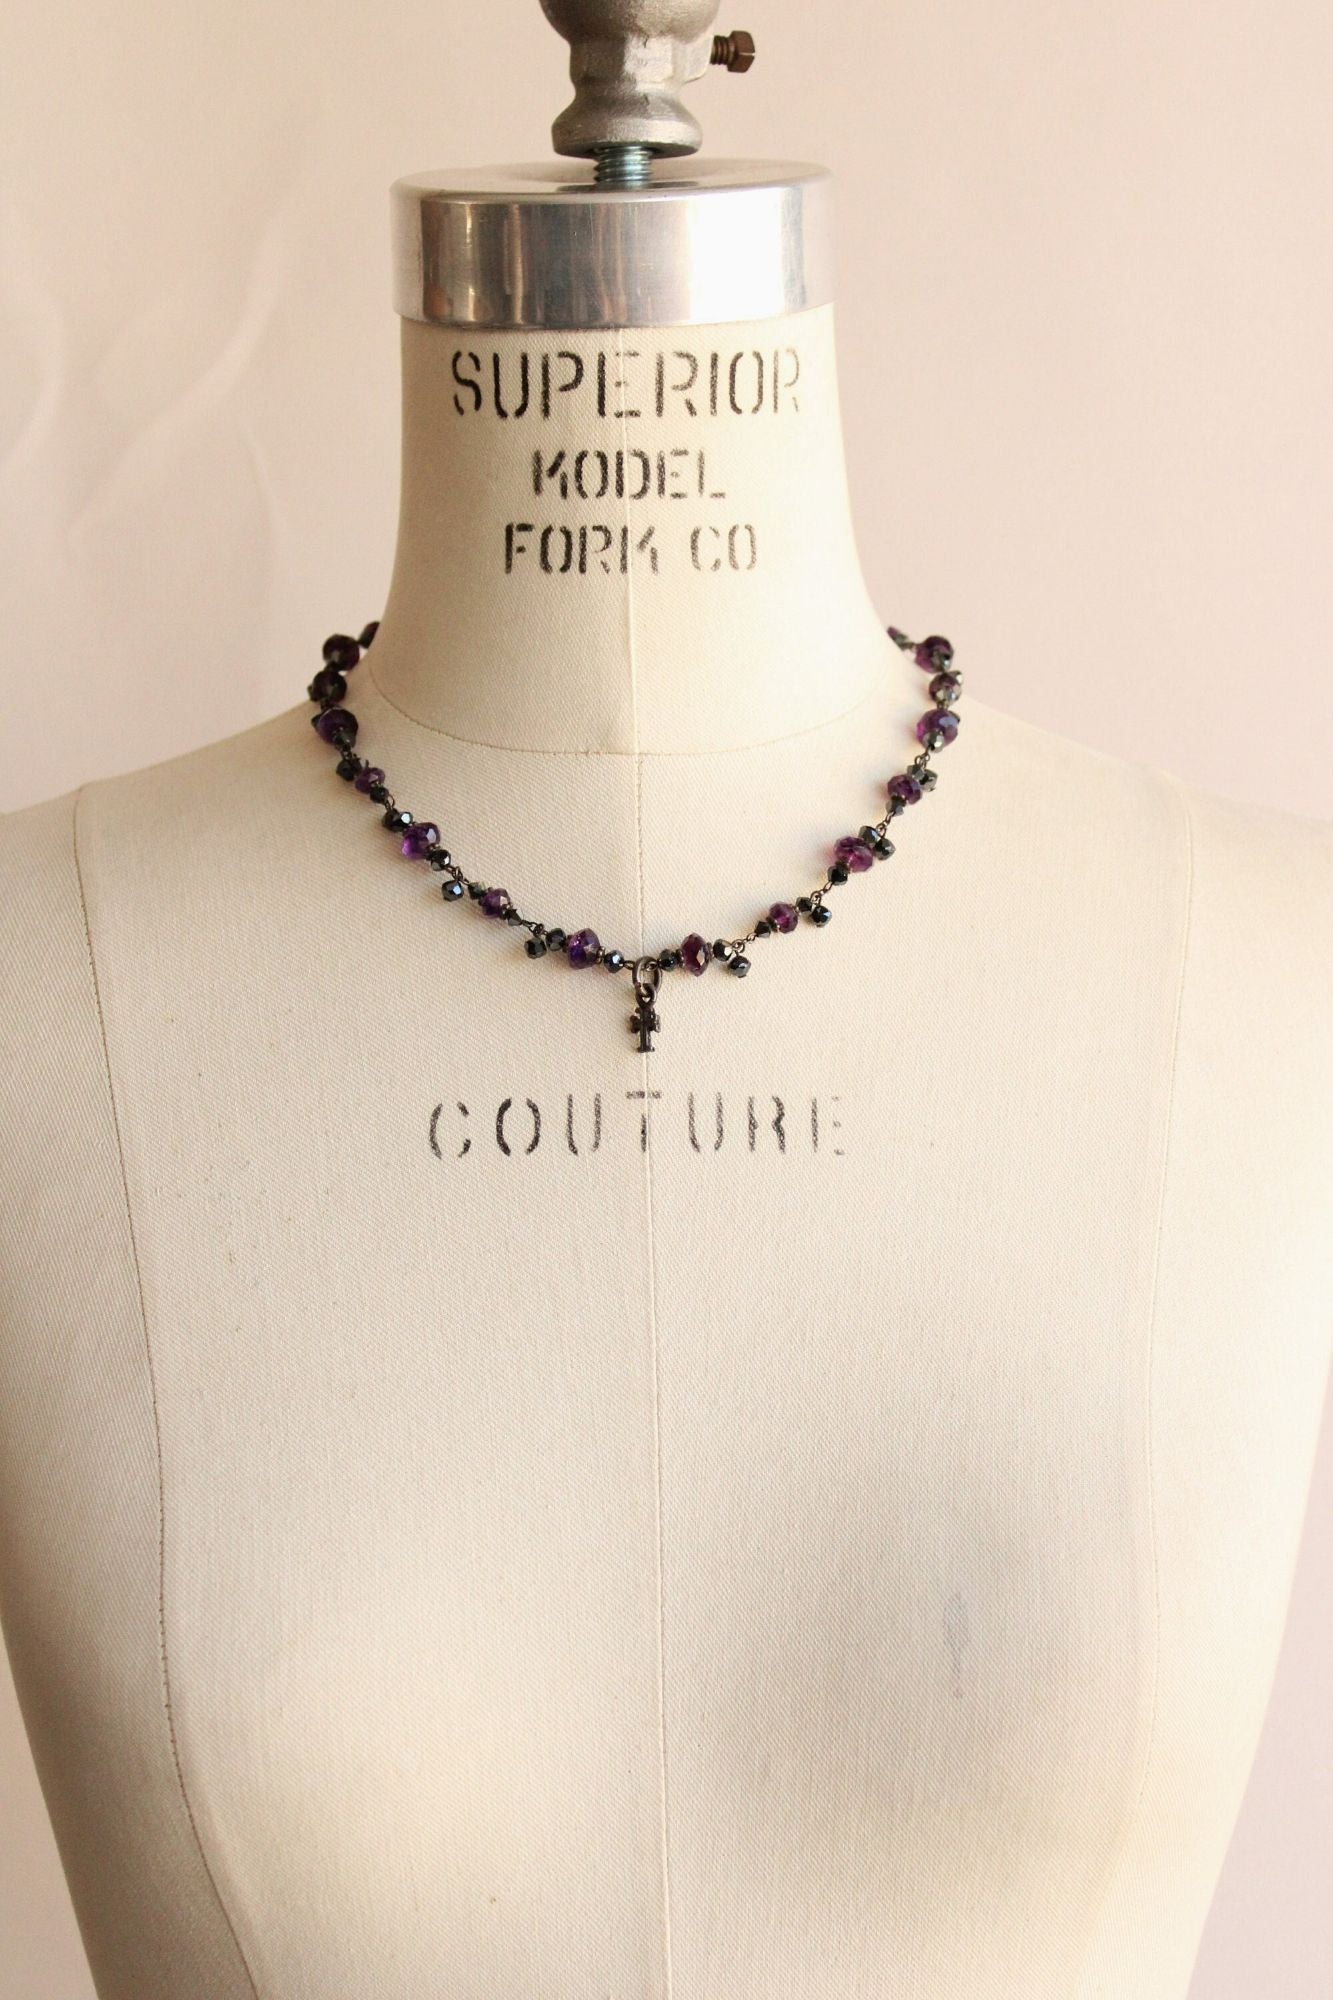 Vintage 1990s Choker with Purple and Black Beads and Small Cross Pendant